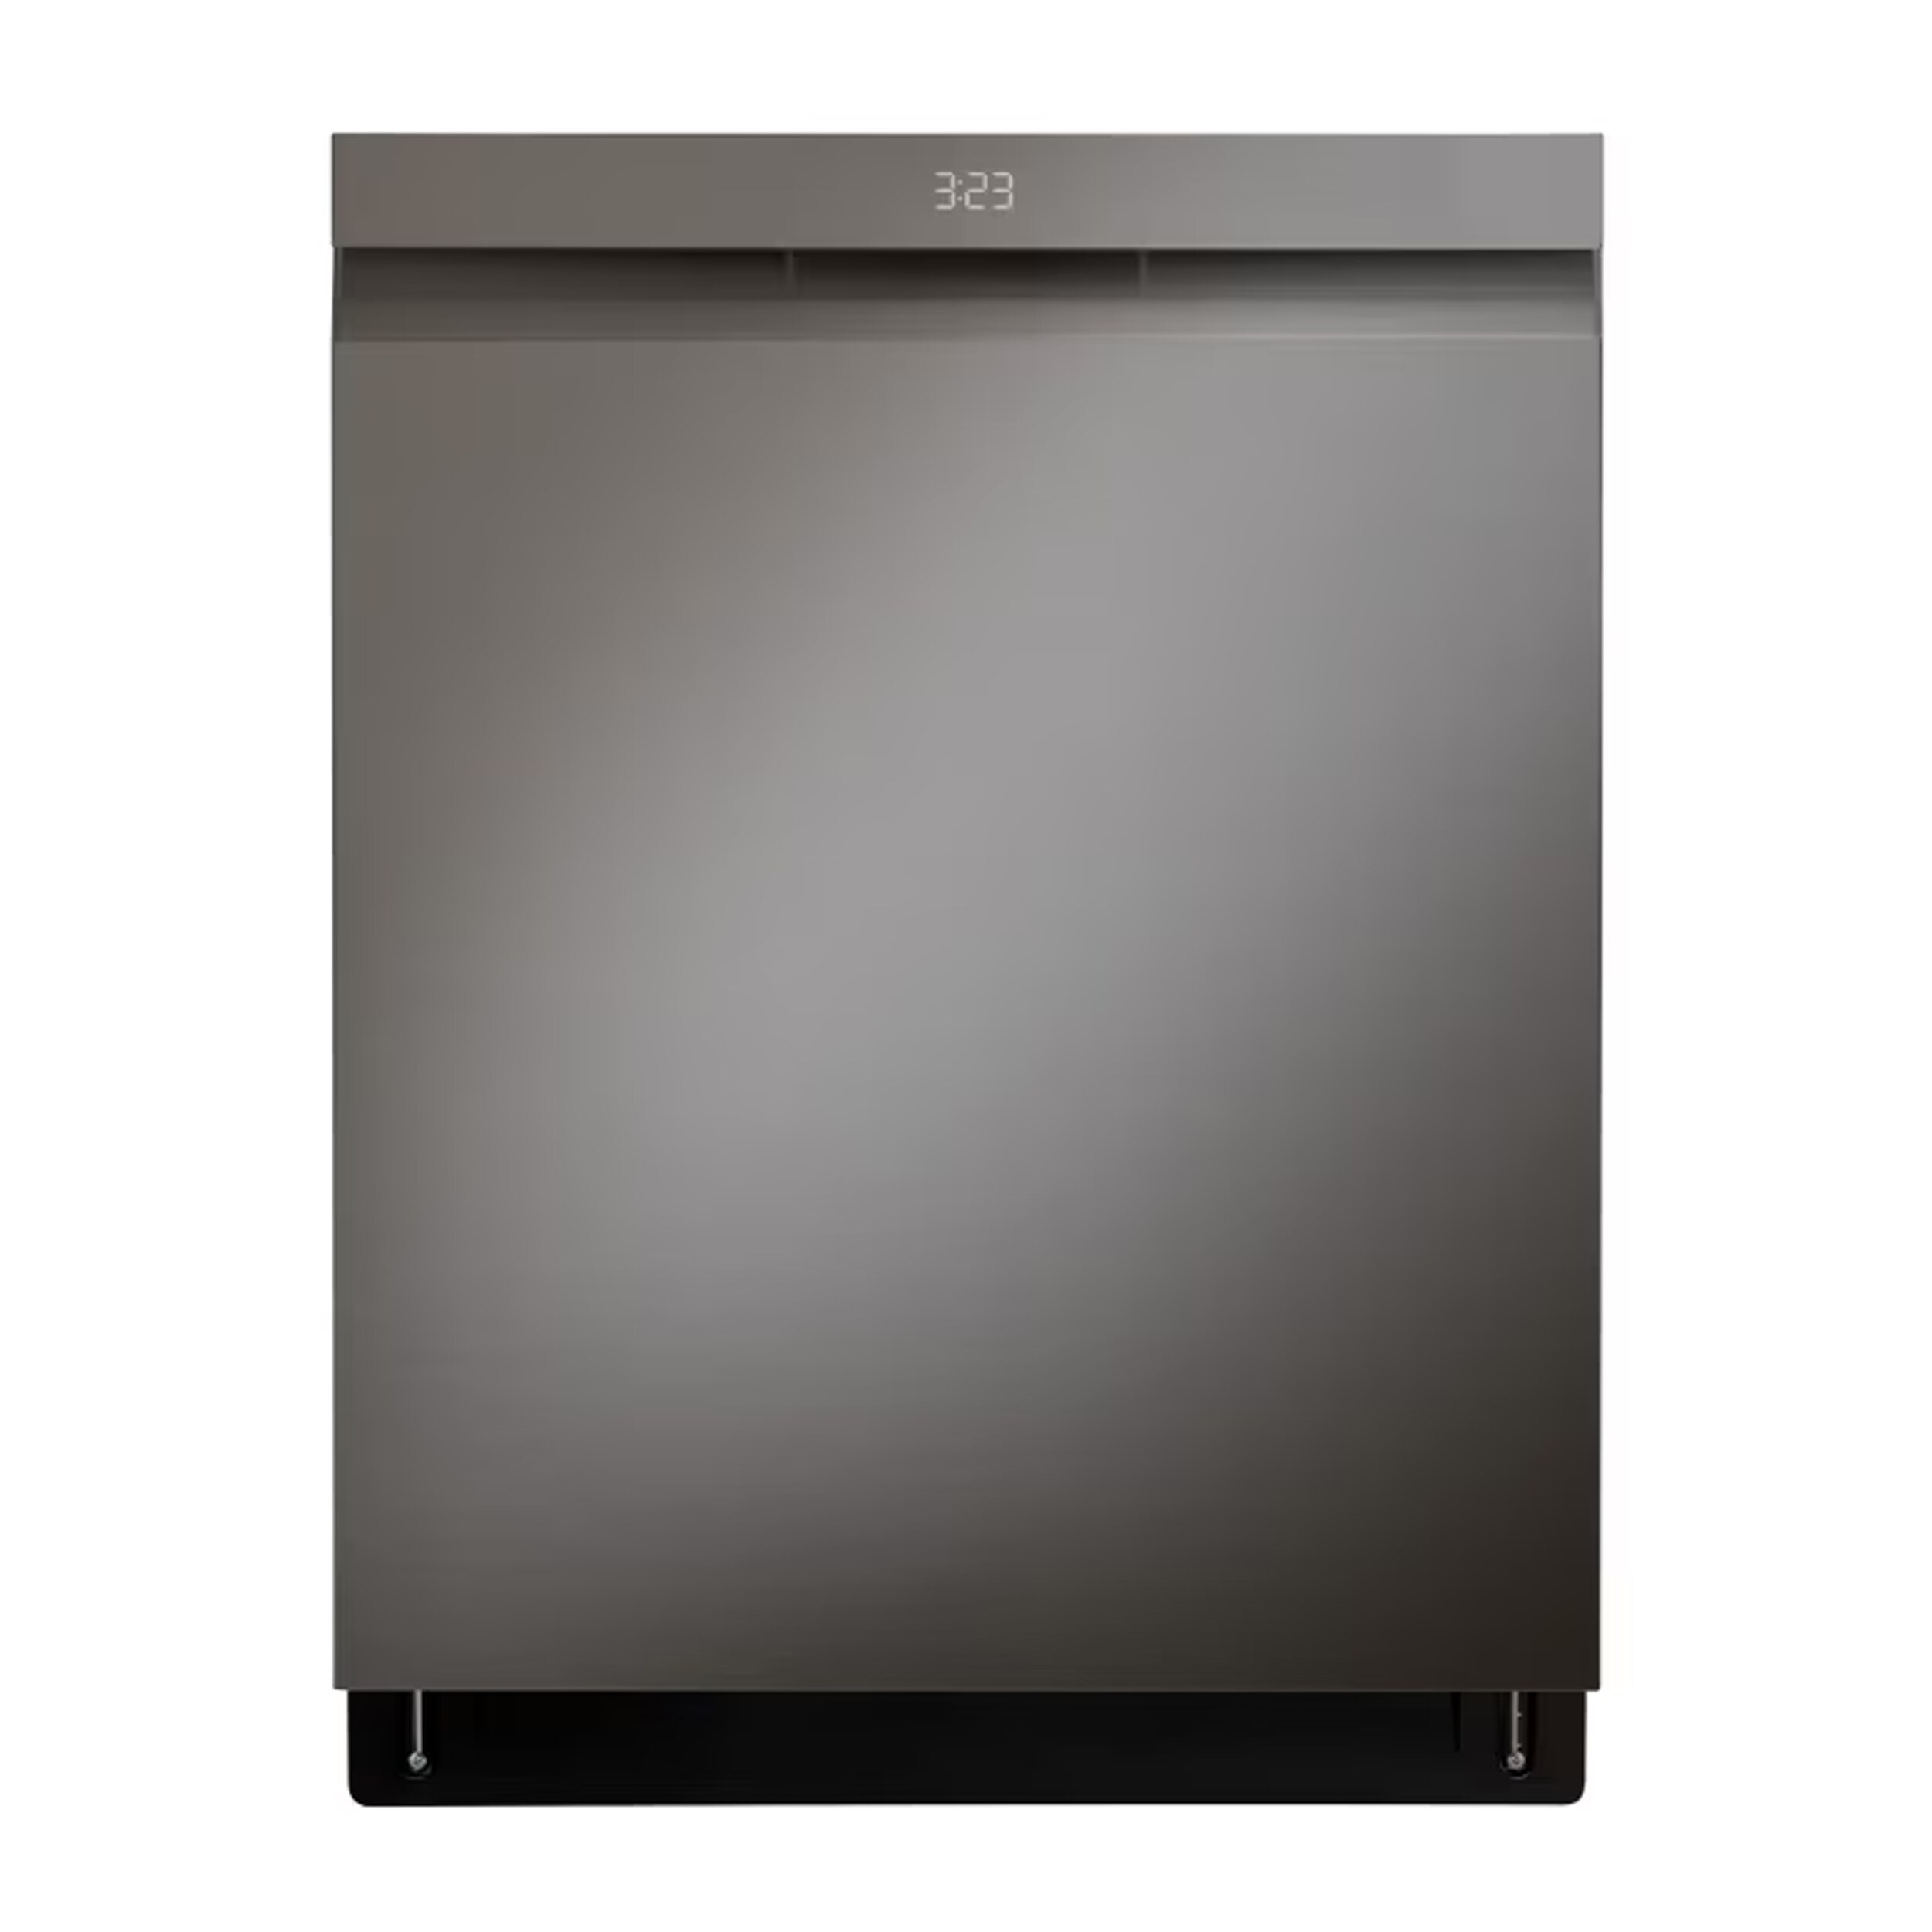 LG SMART TOP CONTROL DISHWASHER WITH 1-HOUR WASH and DRY, QUADWASH PRO, TRUESTEAM AND DYNAMIC HEAT DRY